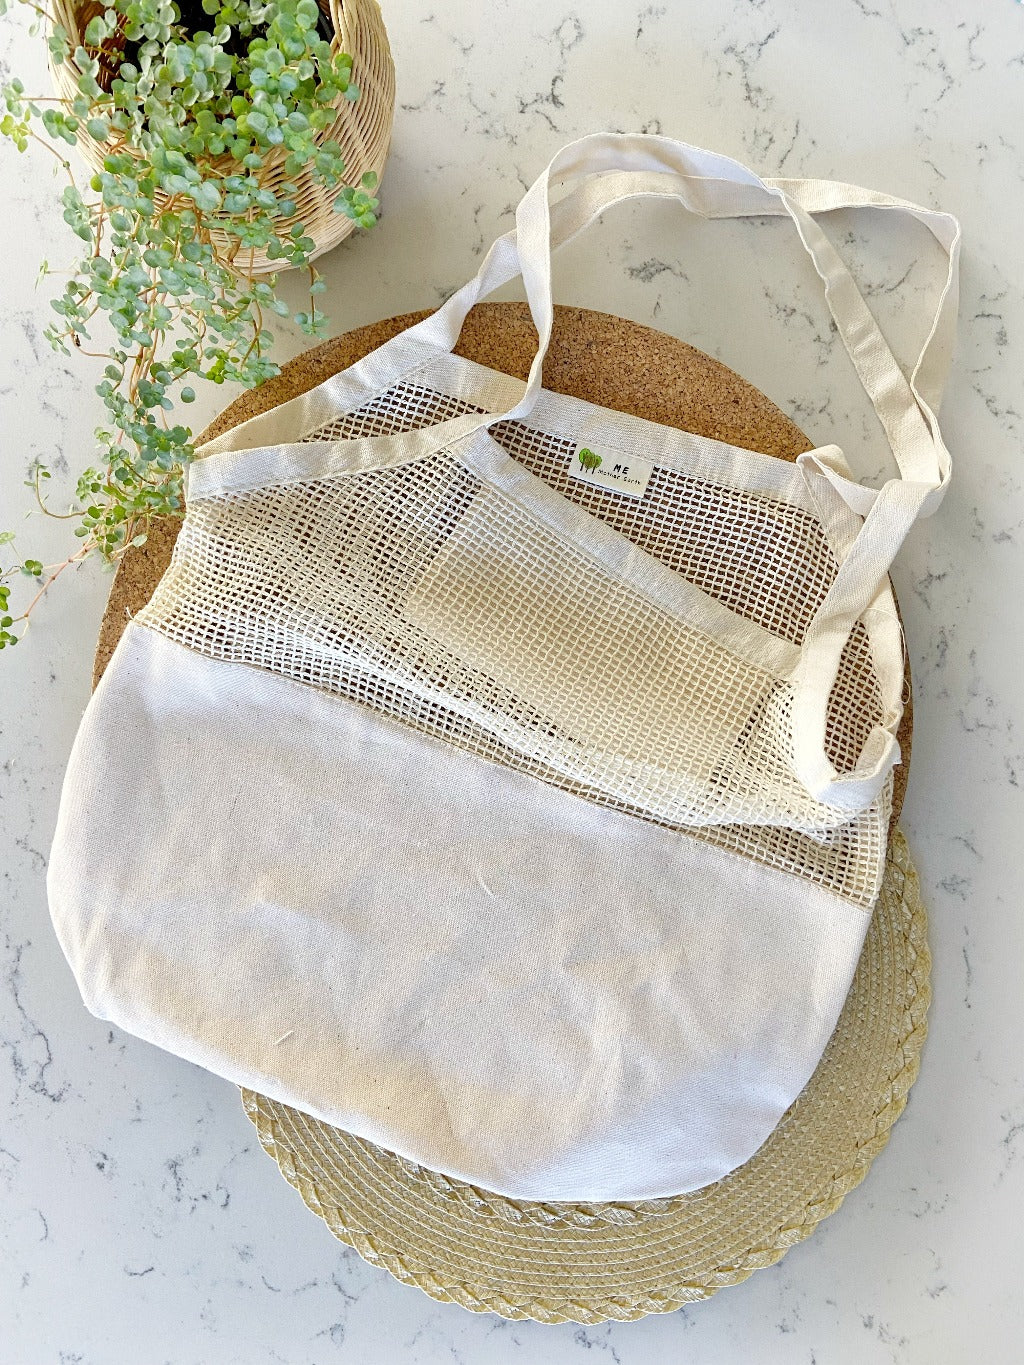 Organic Half Mesh Market Tote with Phone Pocket - Case of 4